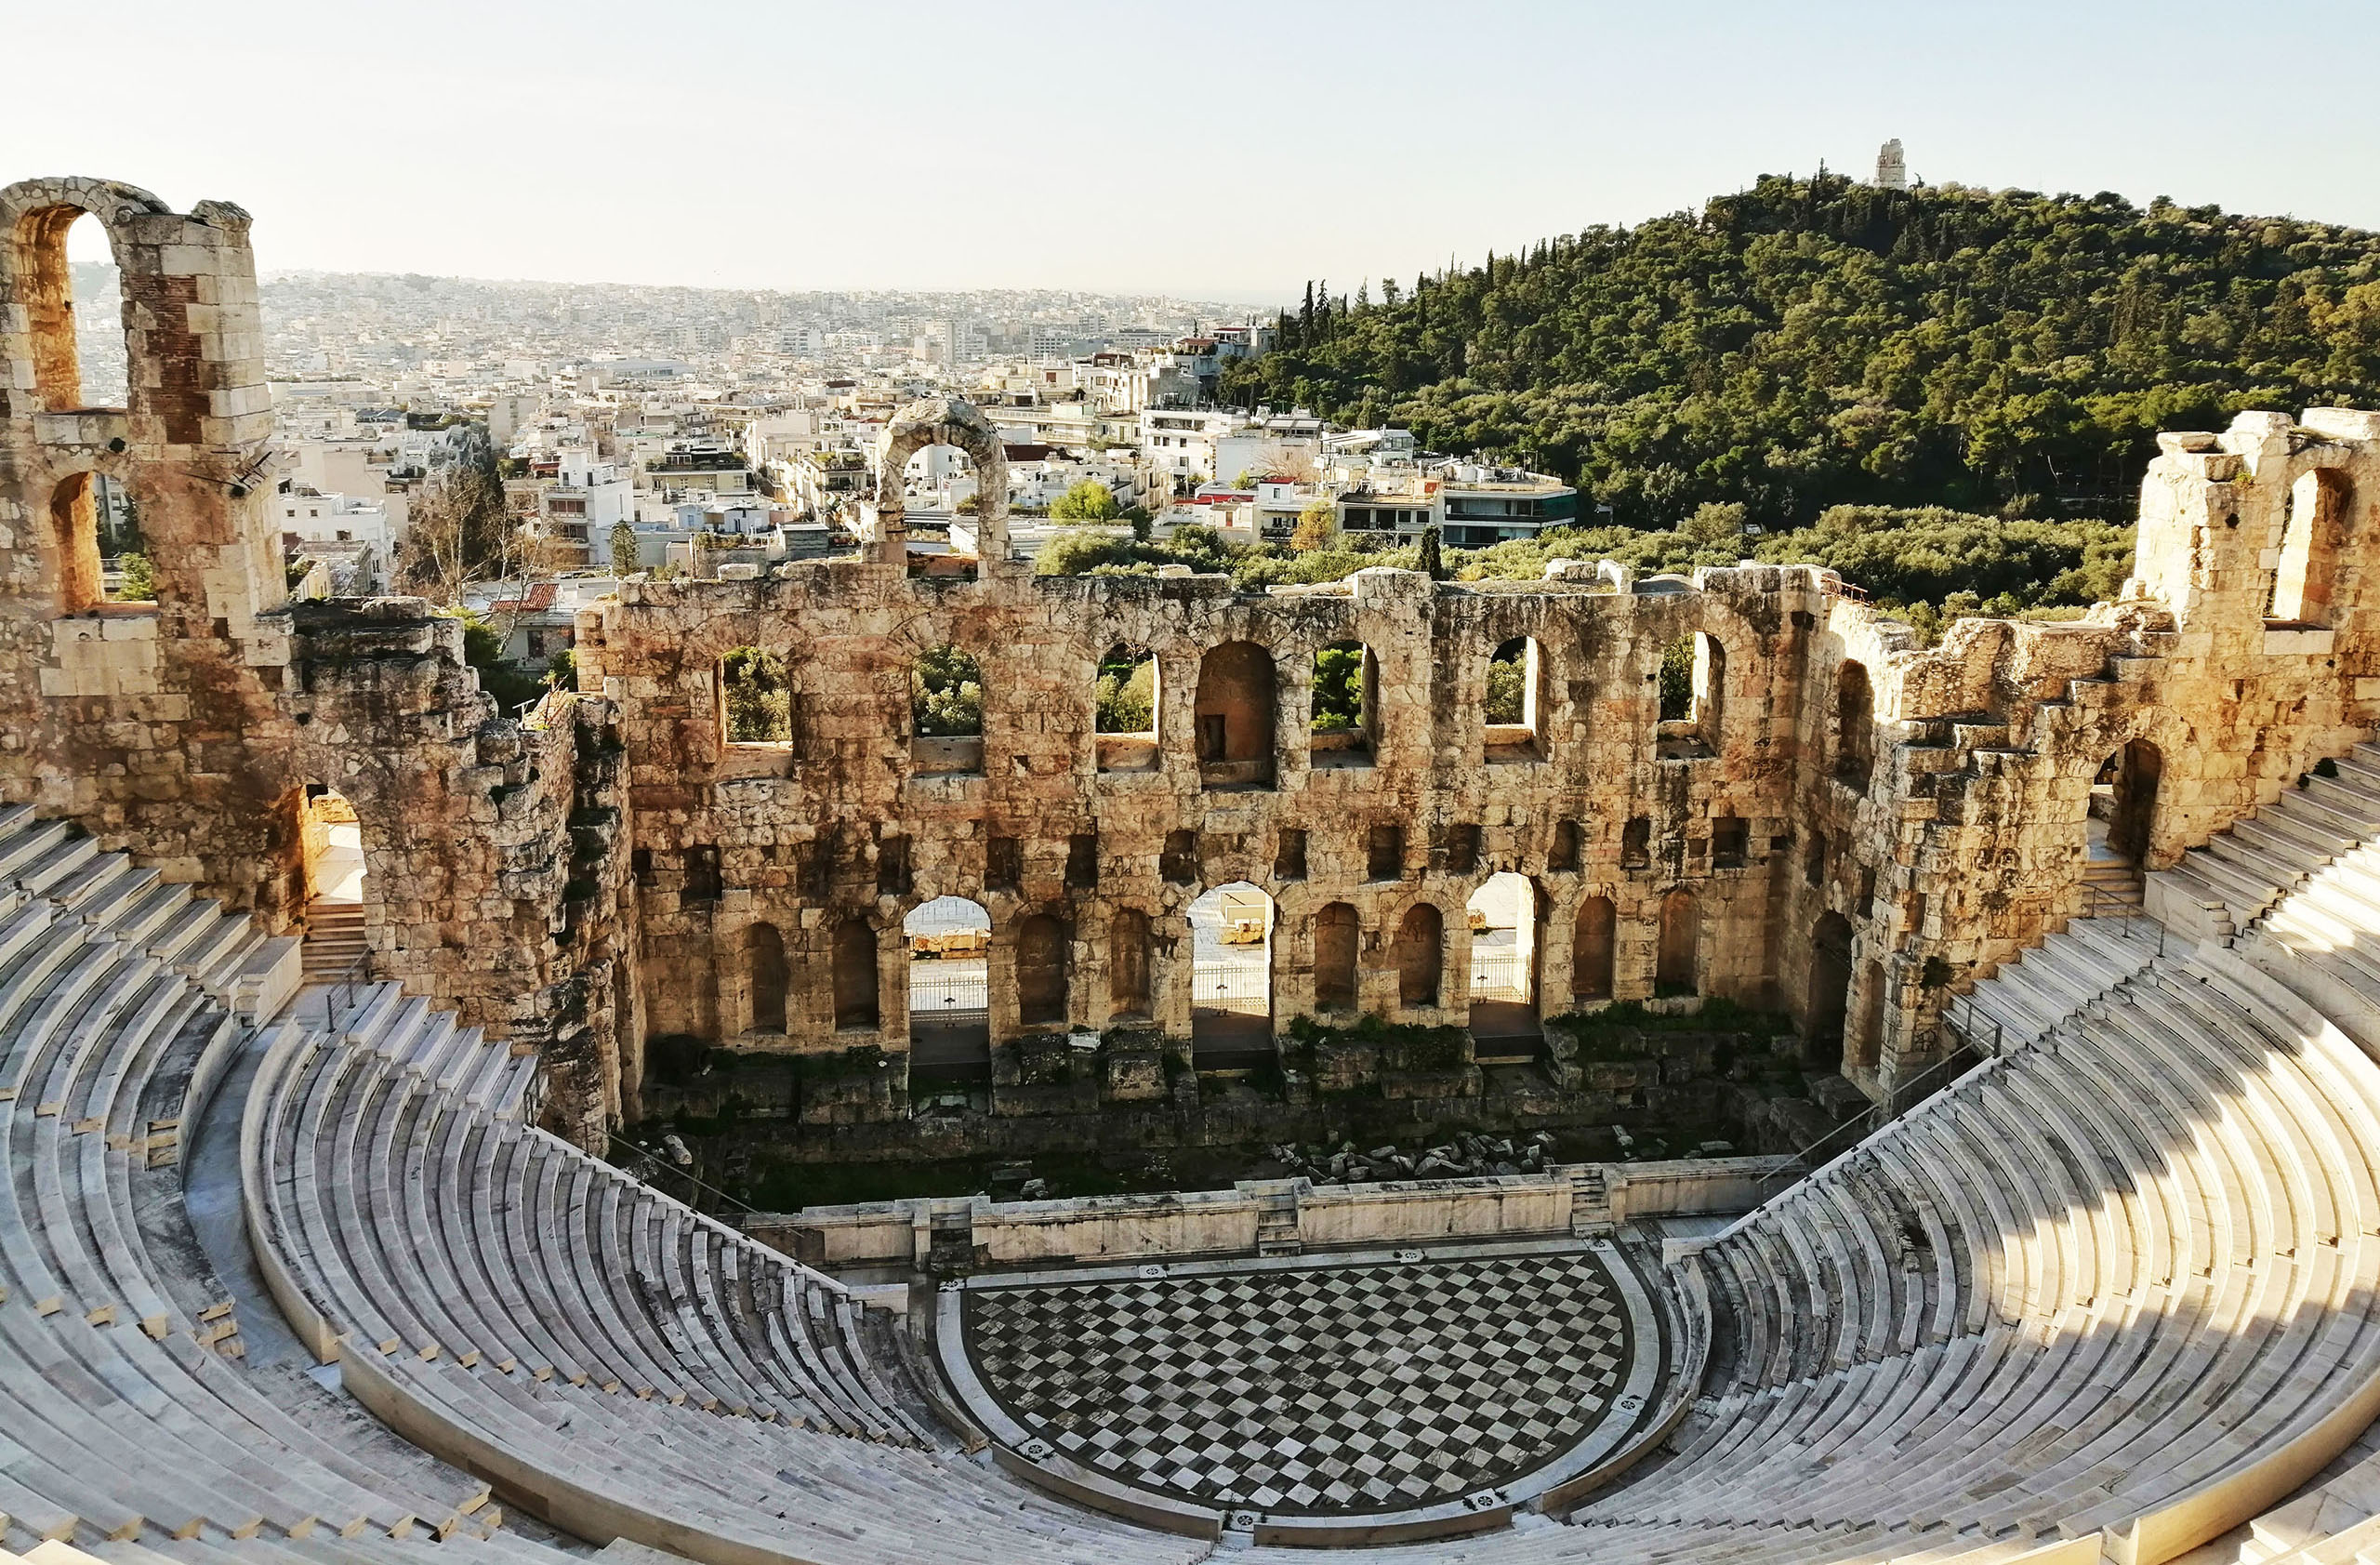 Roman amphitheatre located close to the Acropolis, Athens.Popular setting for musical performances.